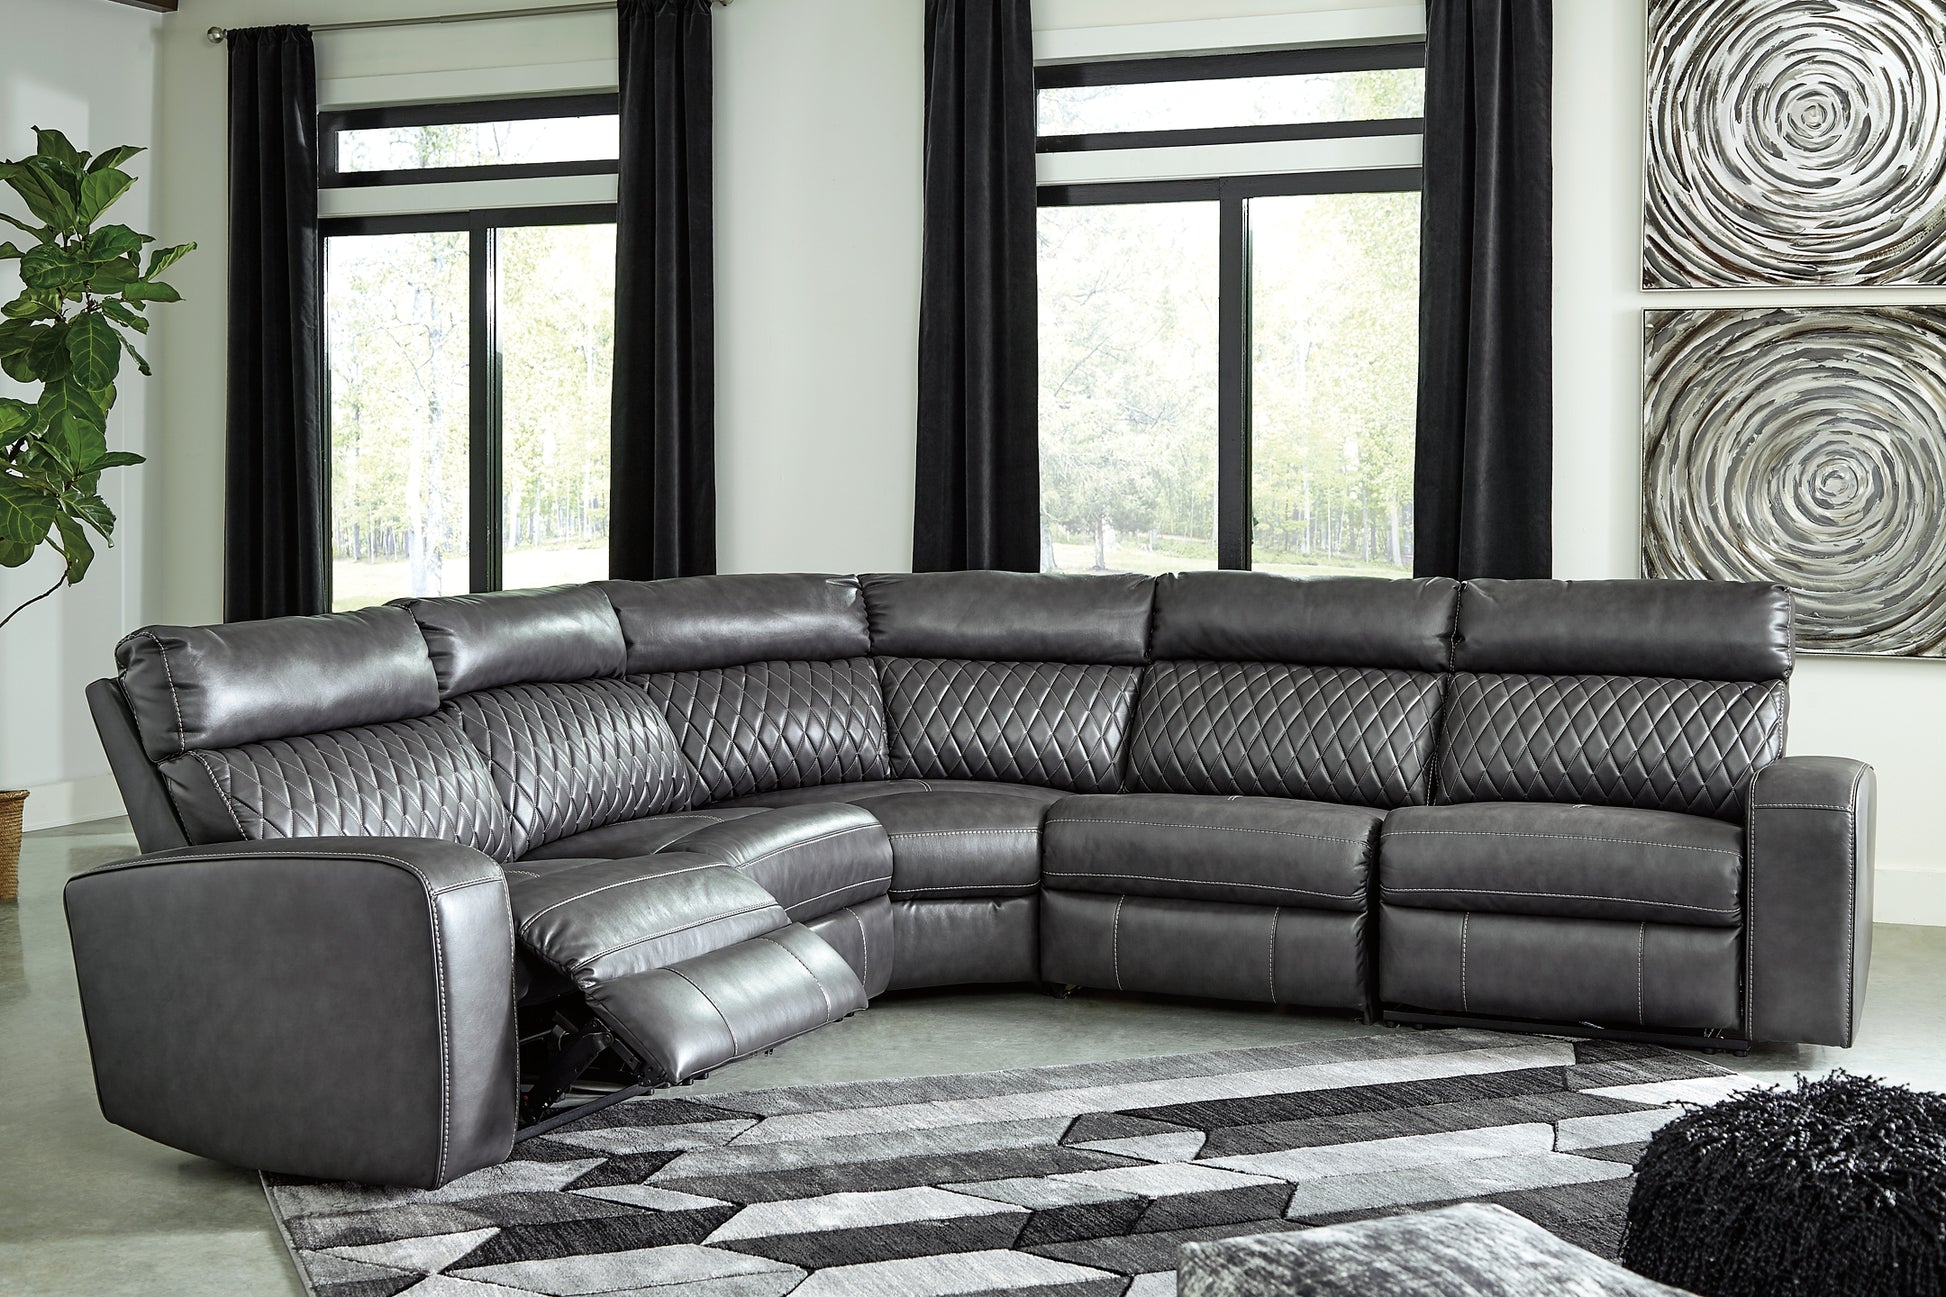 Samperstone 5-Piece Power Reclining Sectional JB's Furniture  Home Furniture, Home Decor, Furniture Store